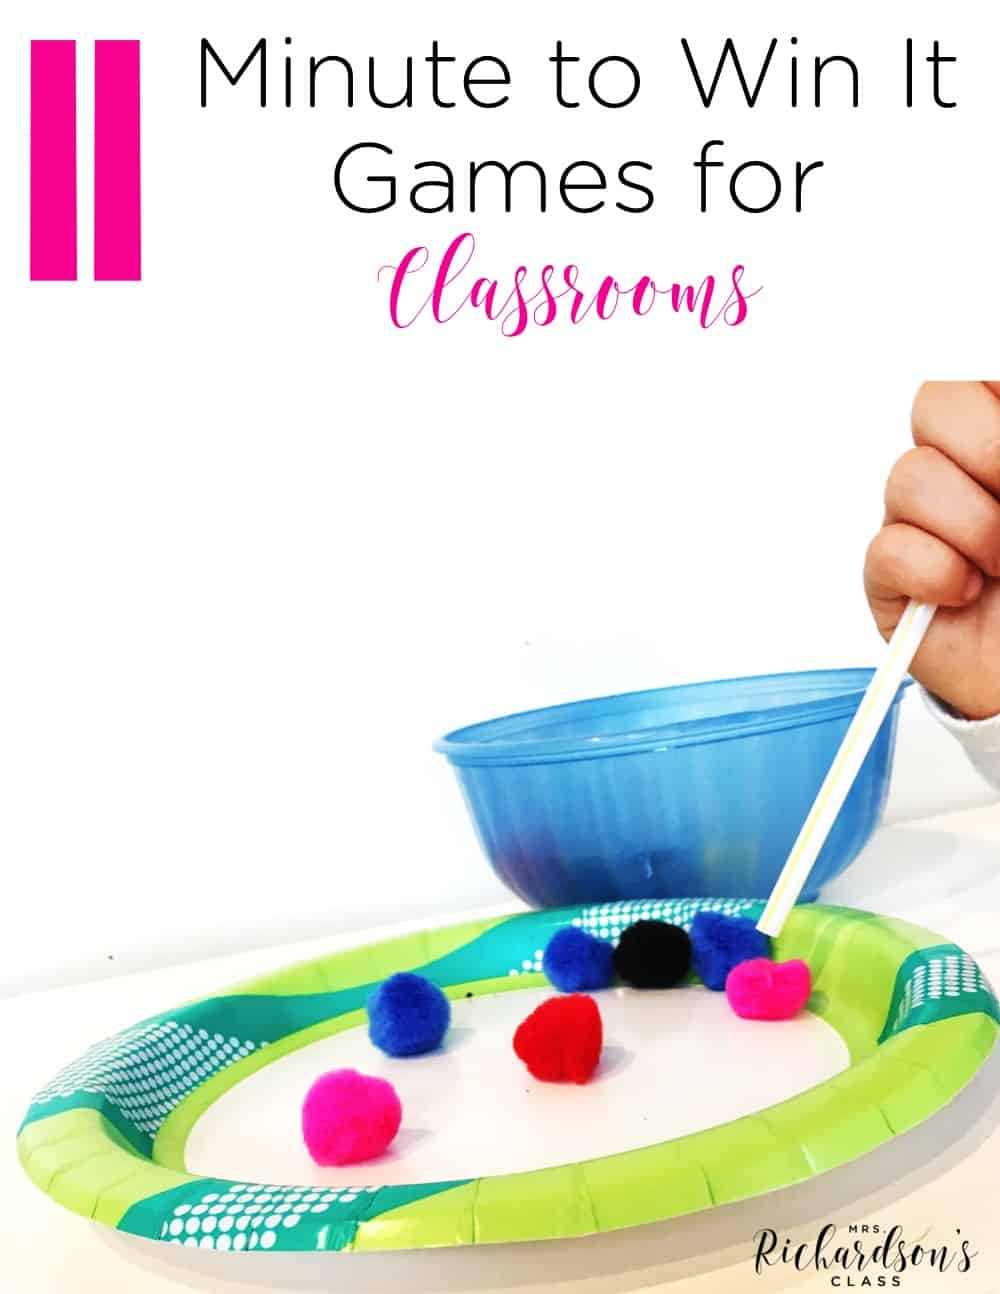 Classroom parties can be fun and organized. These 11 minute to win it classroom party games are sure to be a blast at any party. I've also got tips on my blog to help you manage them and use your volunteers!